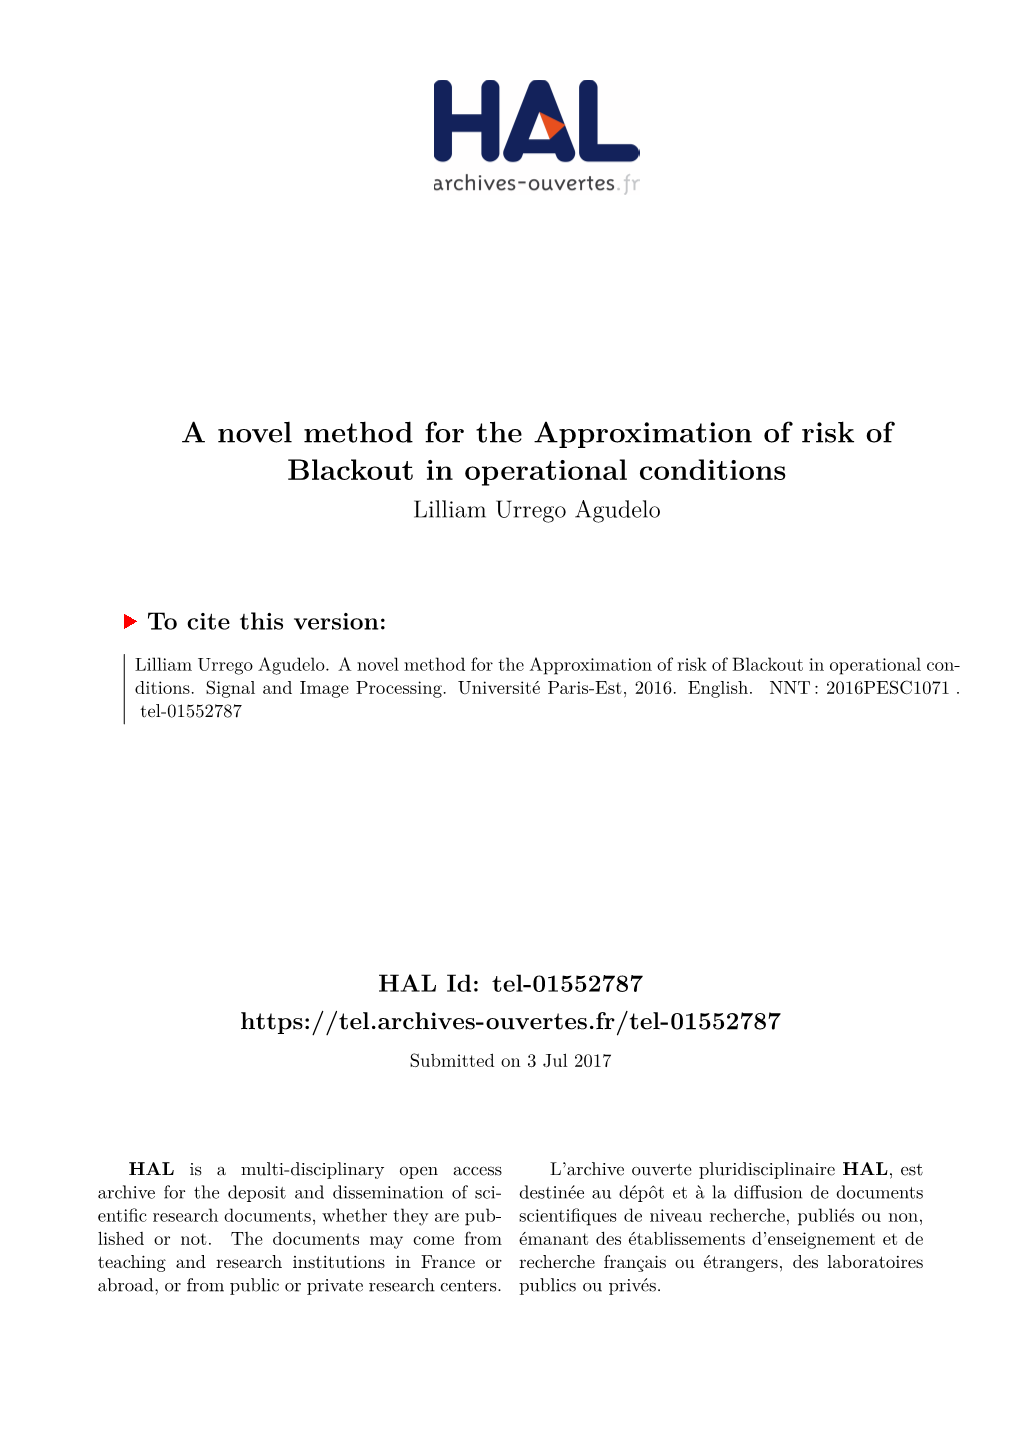 A Novel Method for the Approximation of Risk of Blackout in Operational Conditions Lilliam Urrego Agudelo